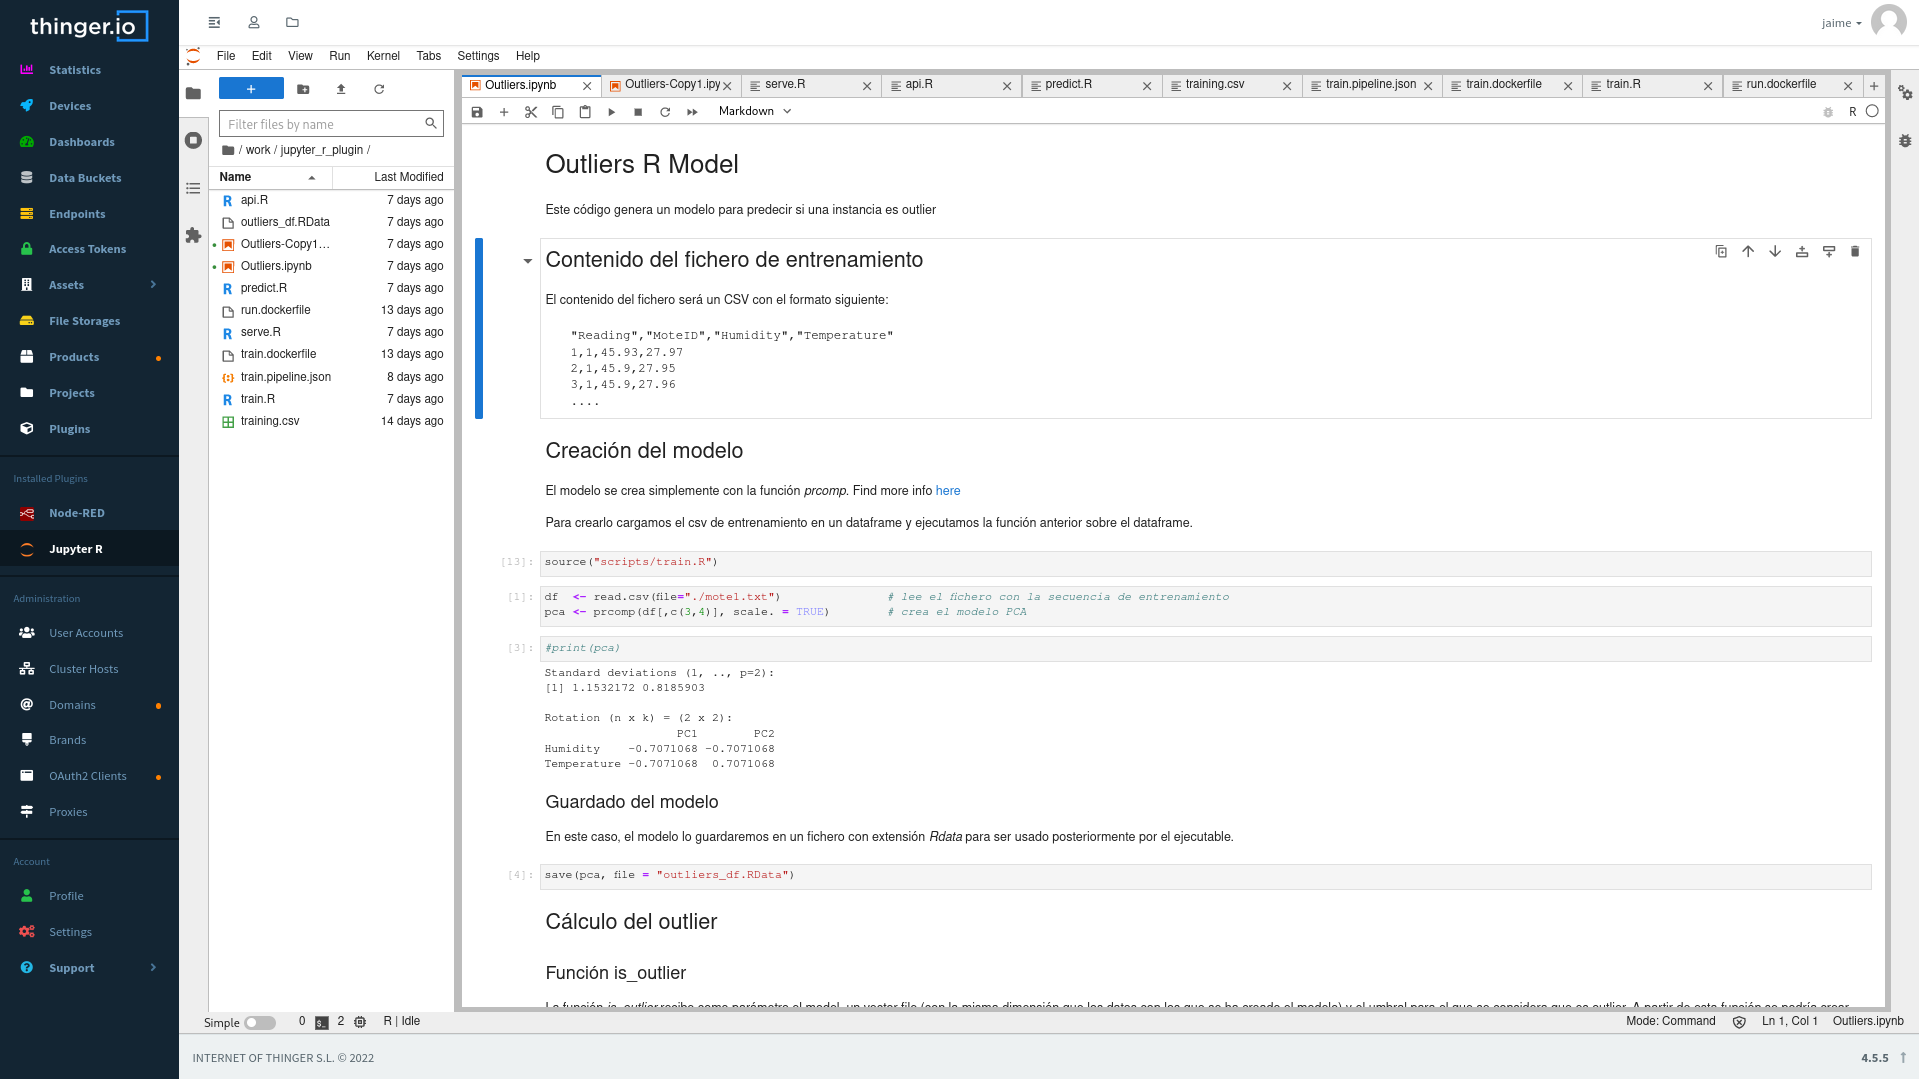 Mockup of Jupyter Notebook integrated within Thinger.io